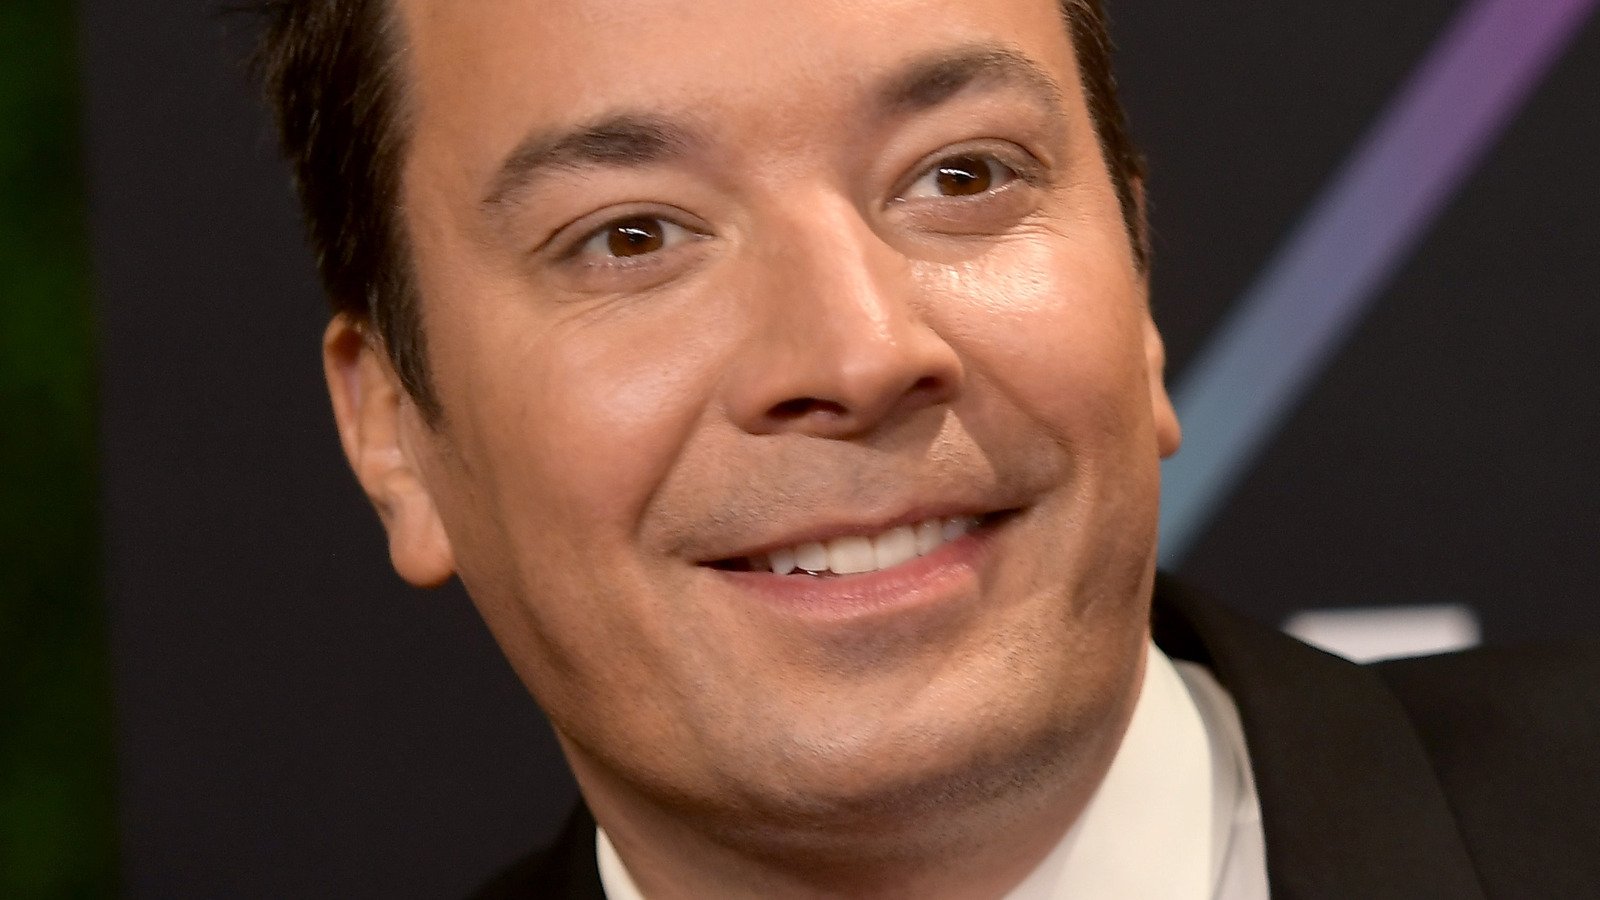 Here's Why Jimmy Fallon Really Left SNL